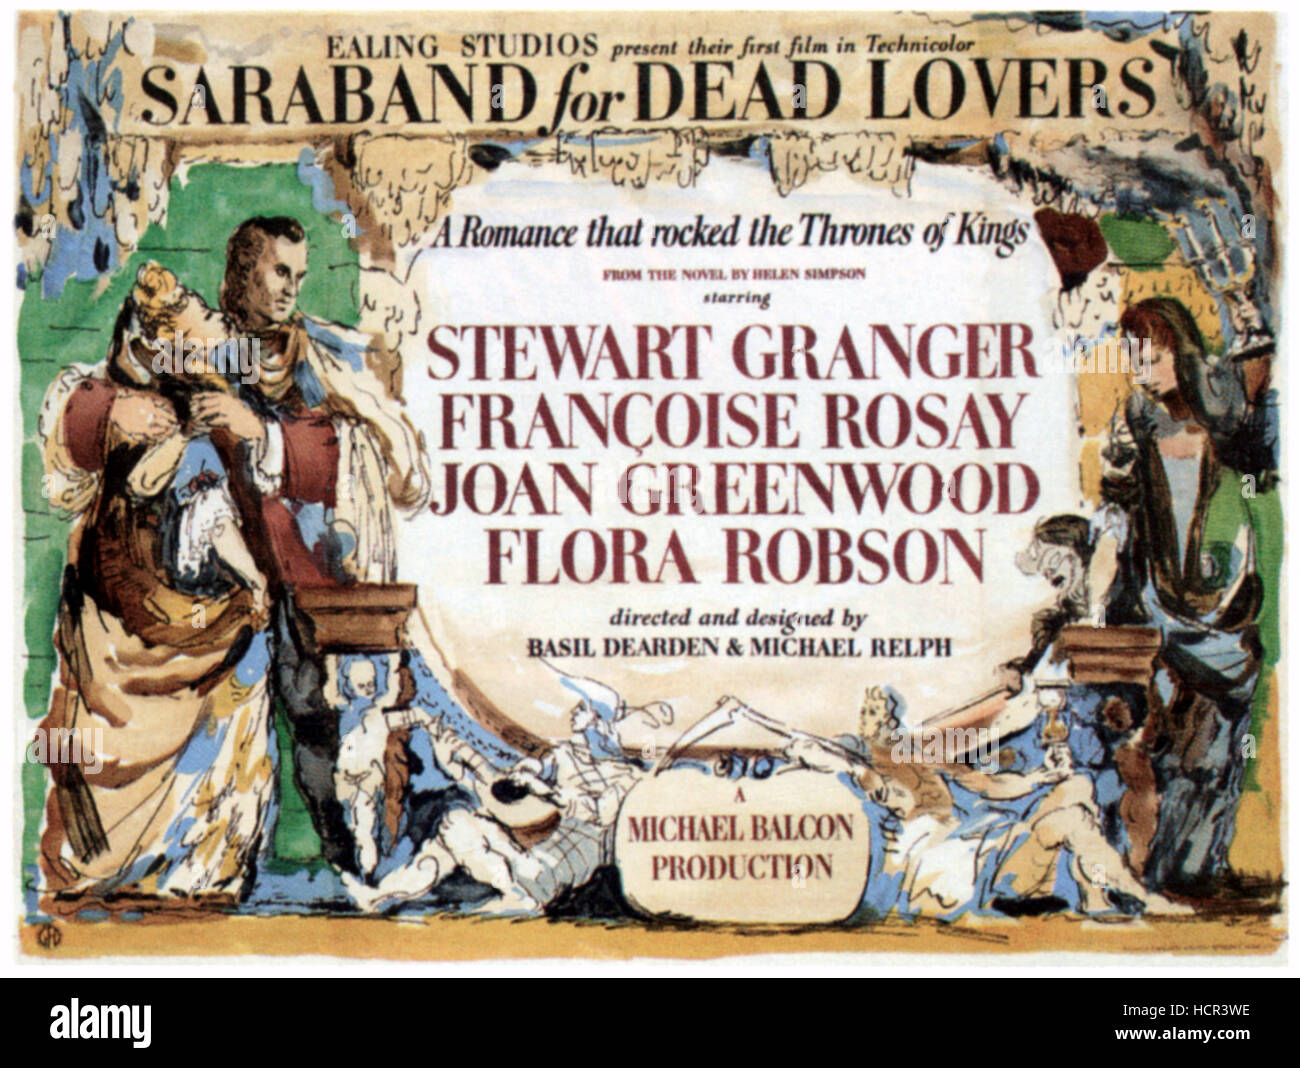 SARABAND FOR DEAD LOVERS, 1948. Stock Photo